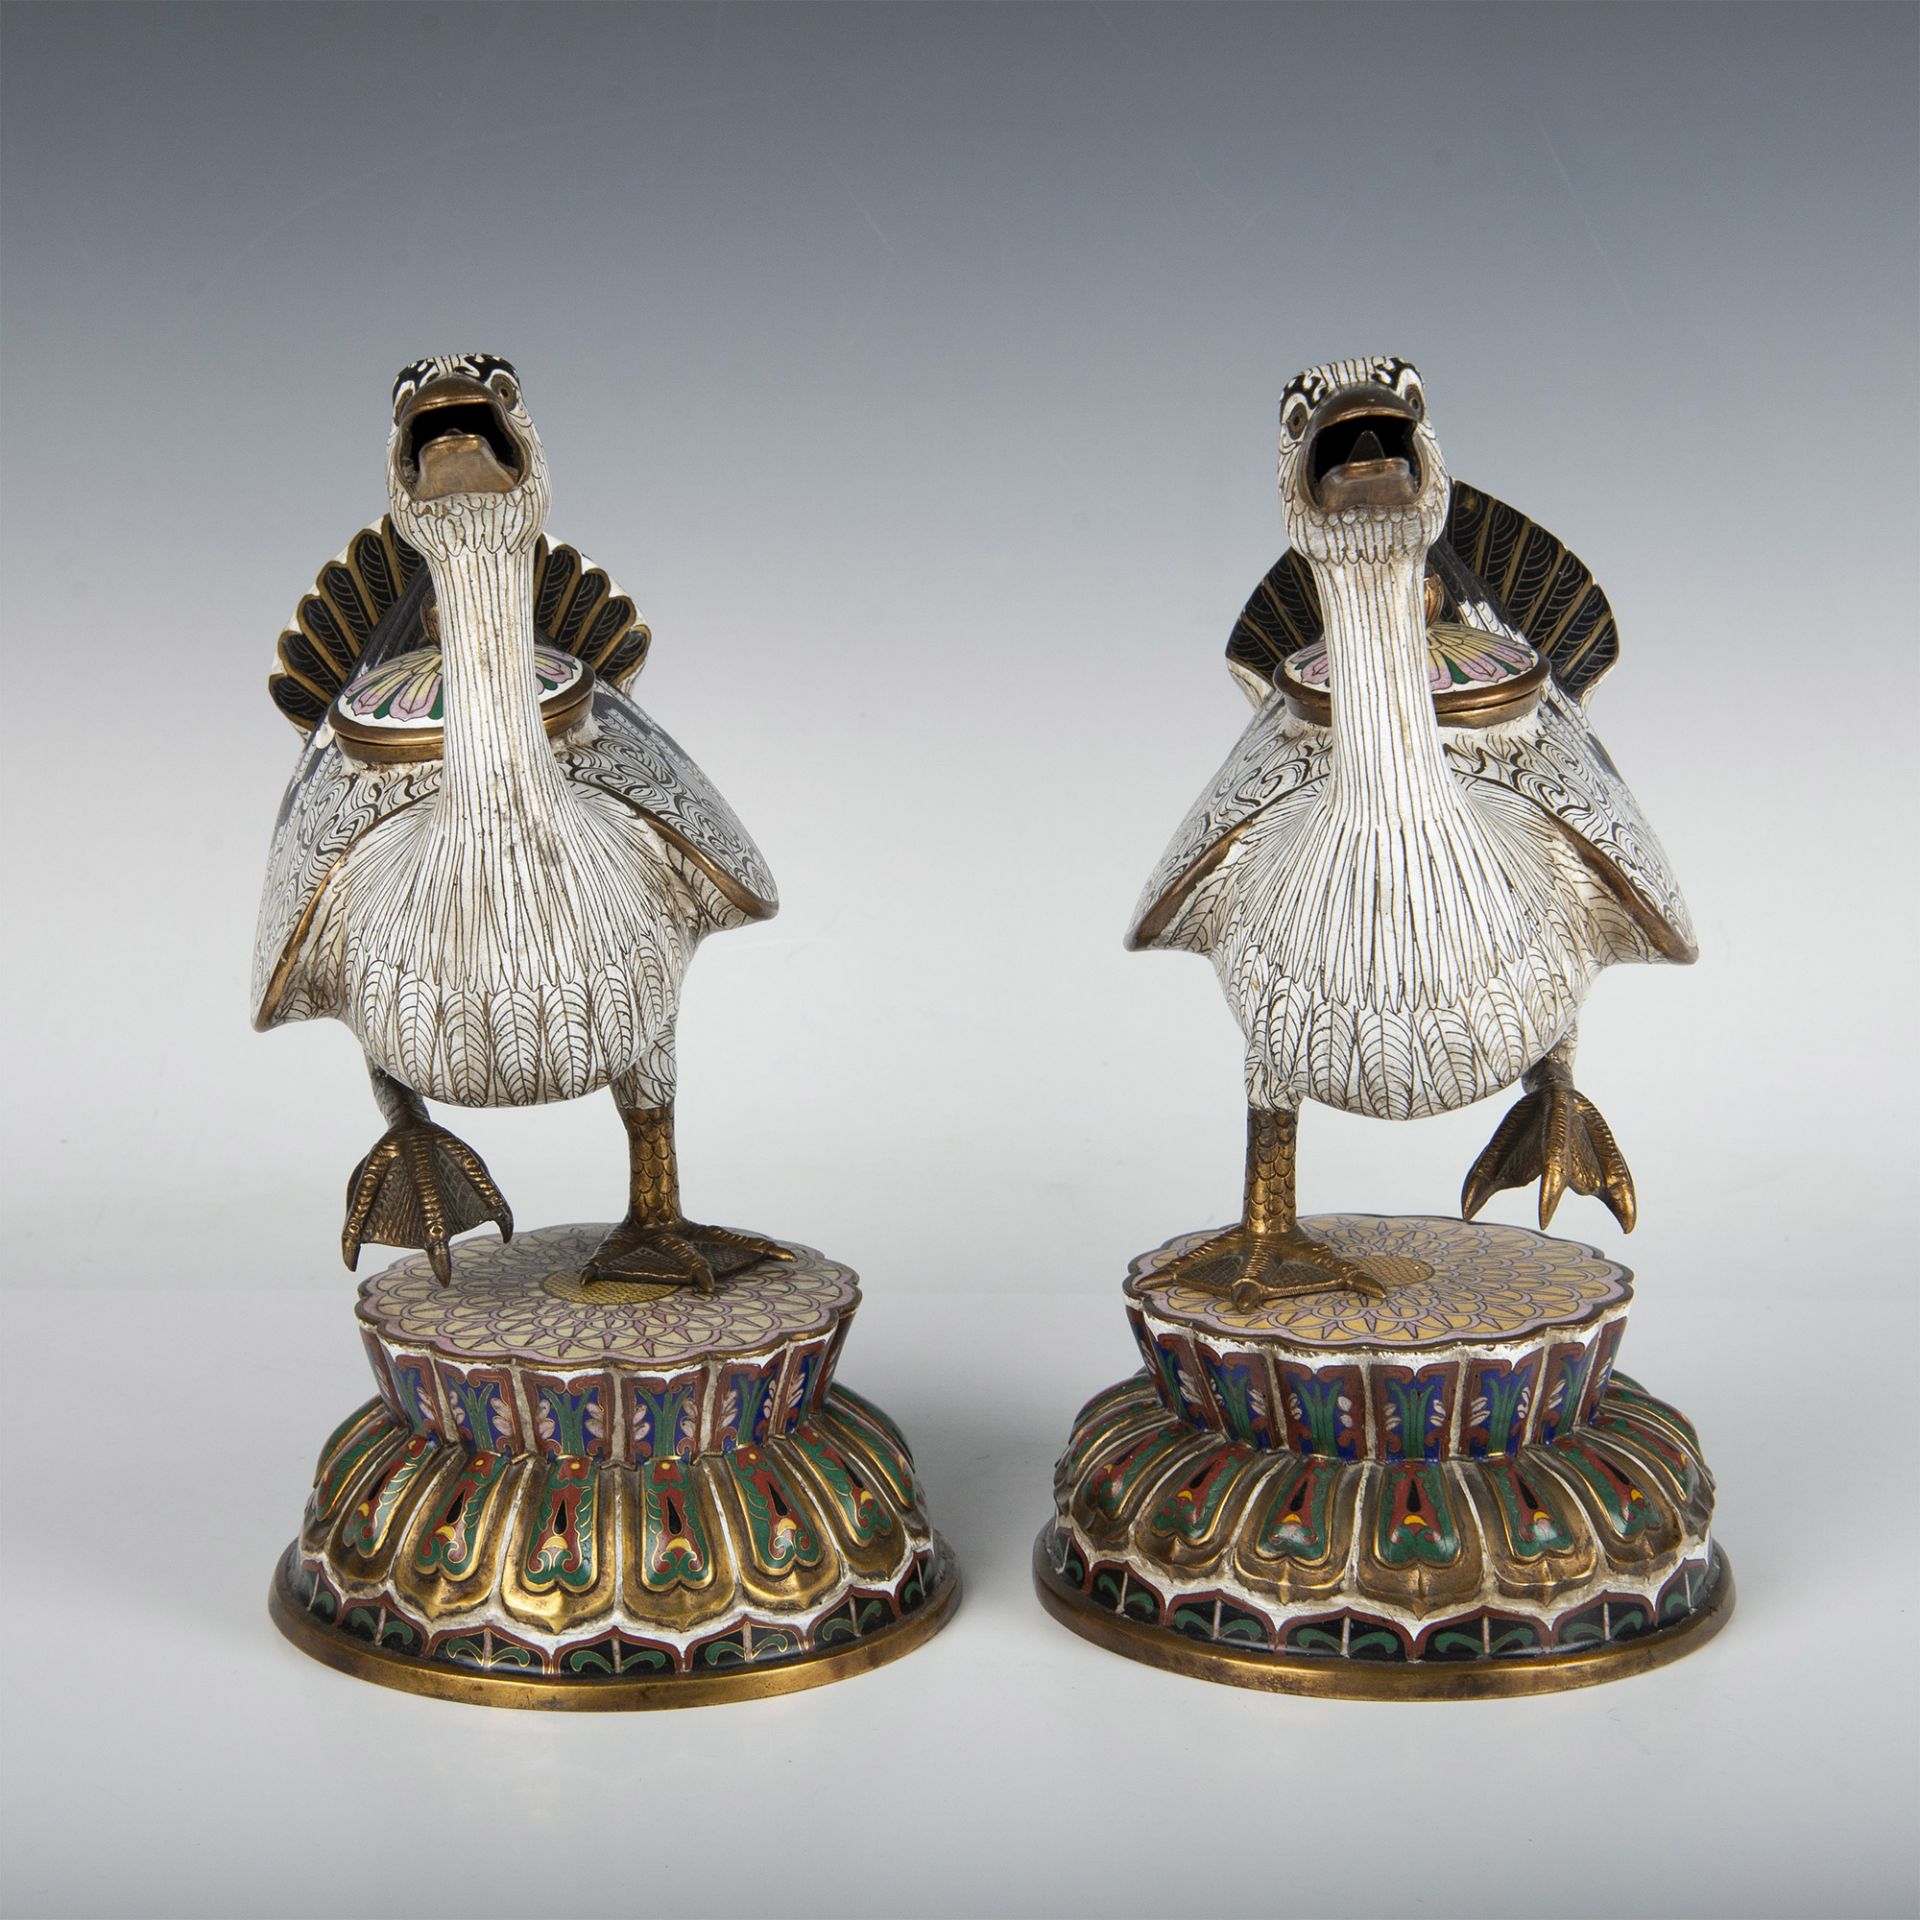 Pair of Chinese Cloisonne Duck Censers - Image 2 of 11